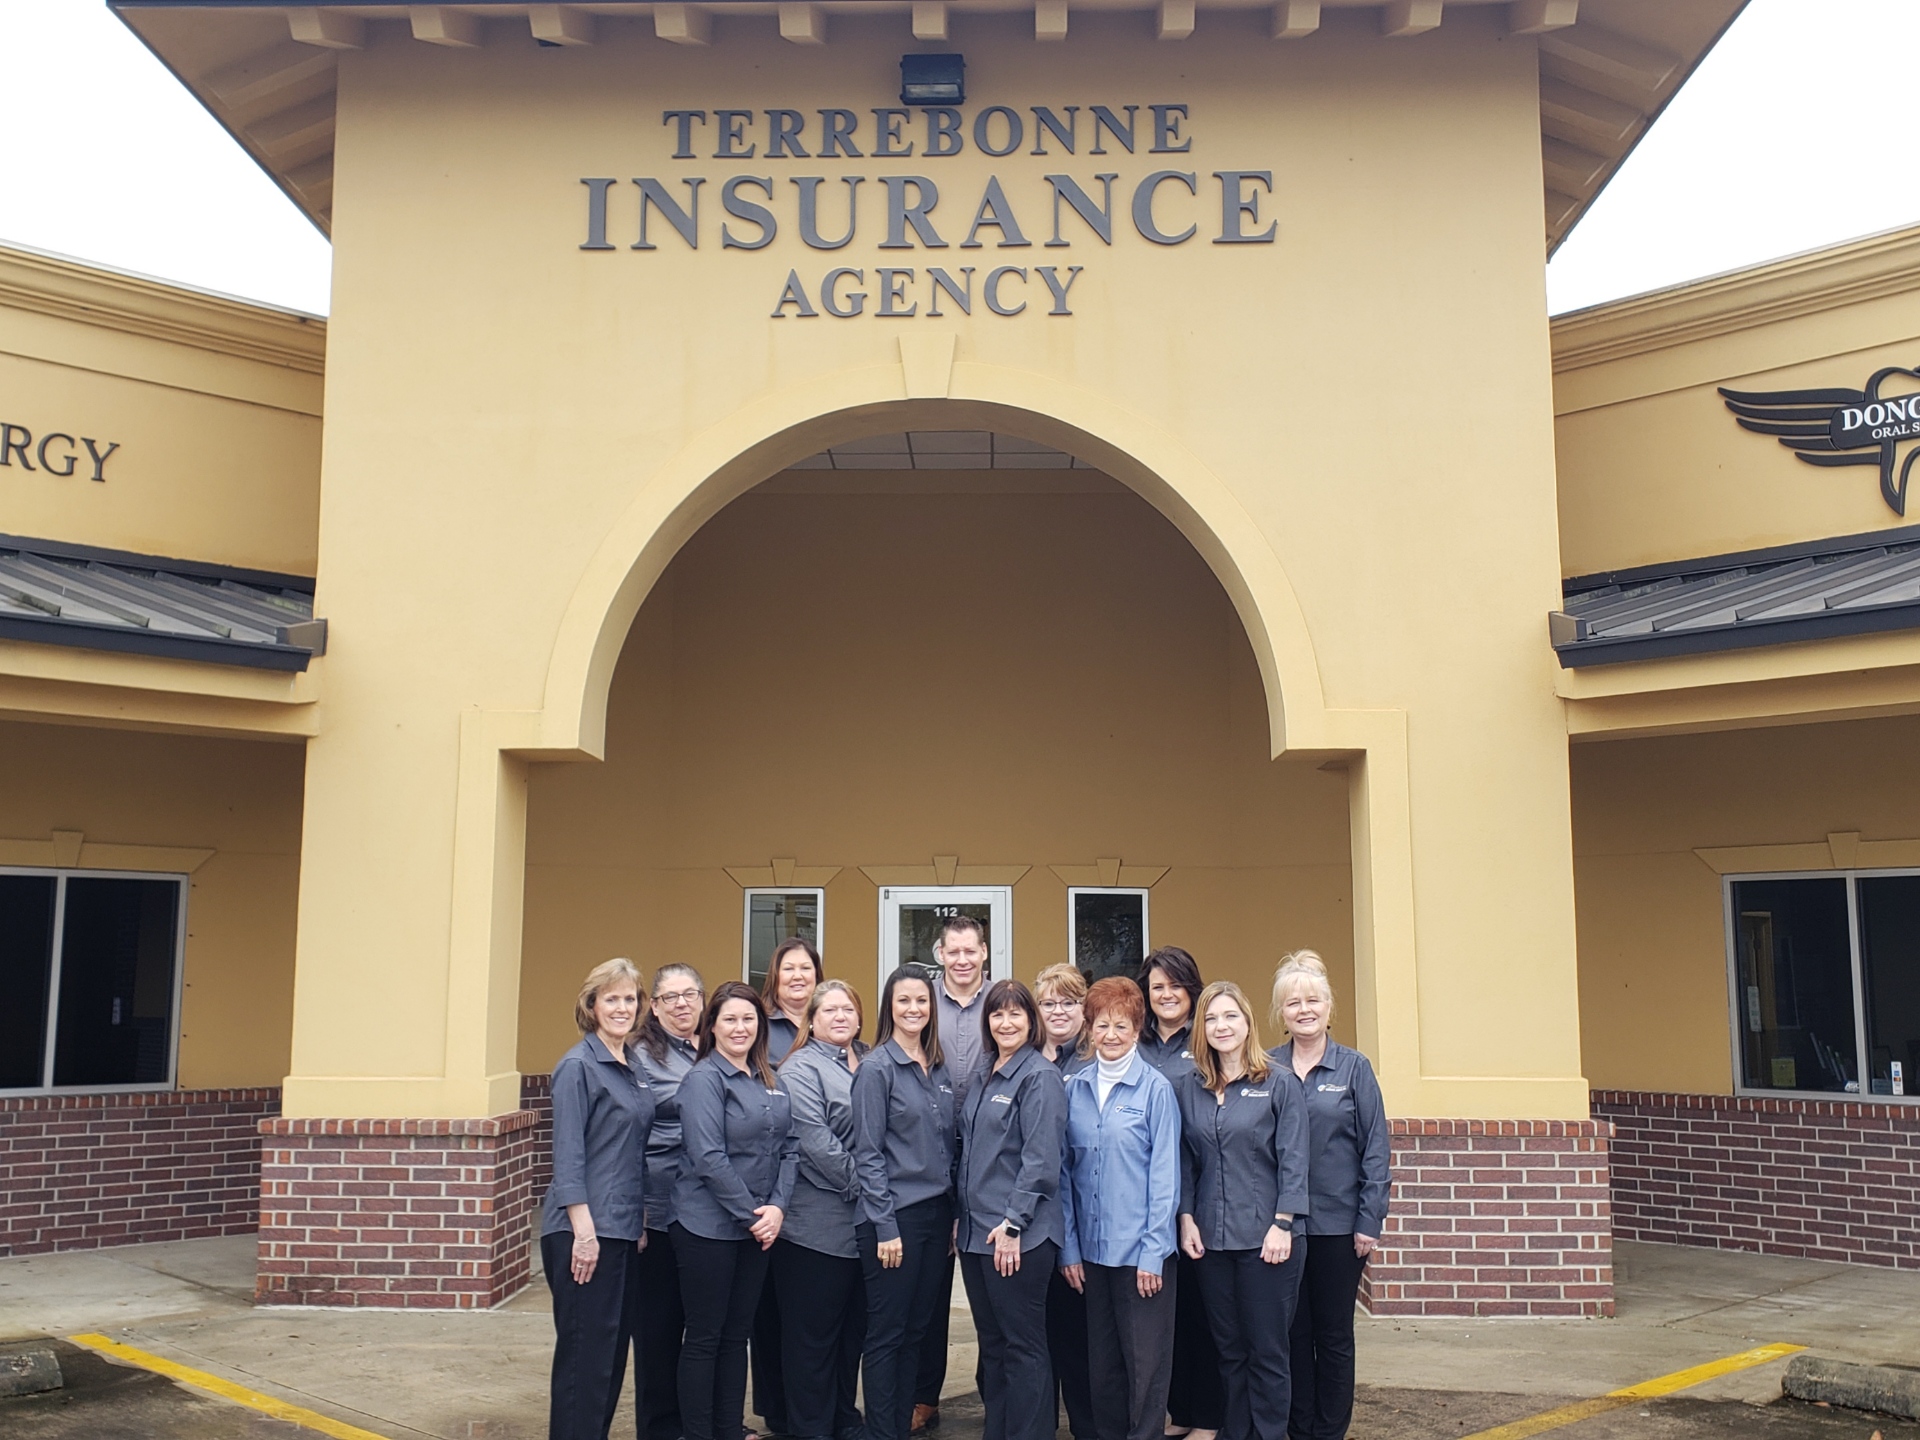 History of Terrebonne Insurance Agency with Kelly and Kitty